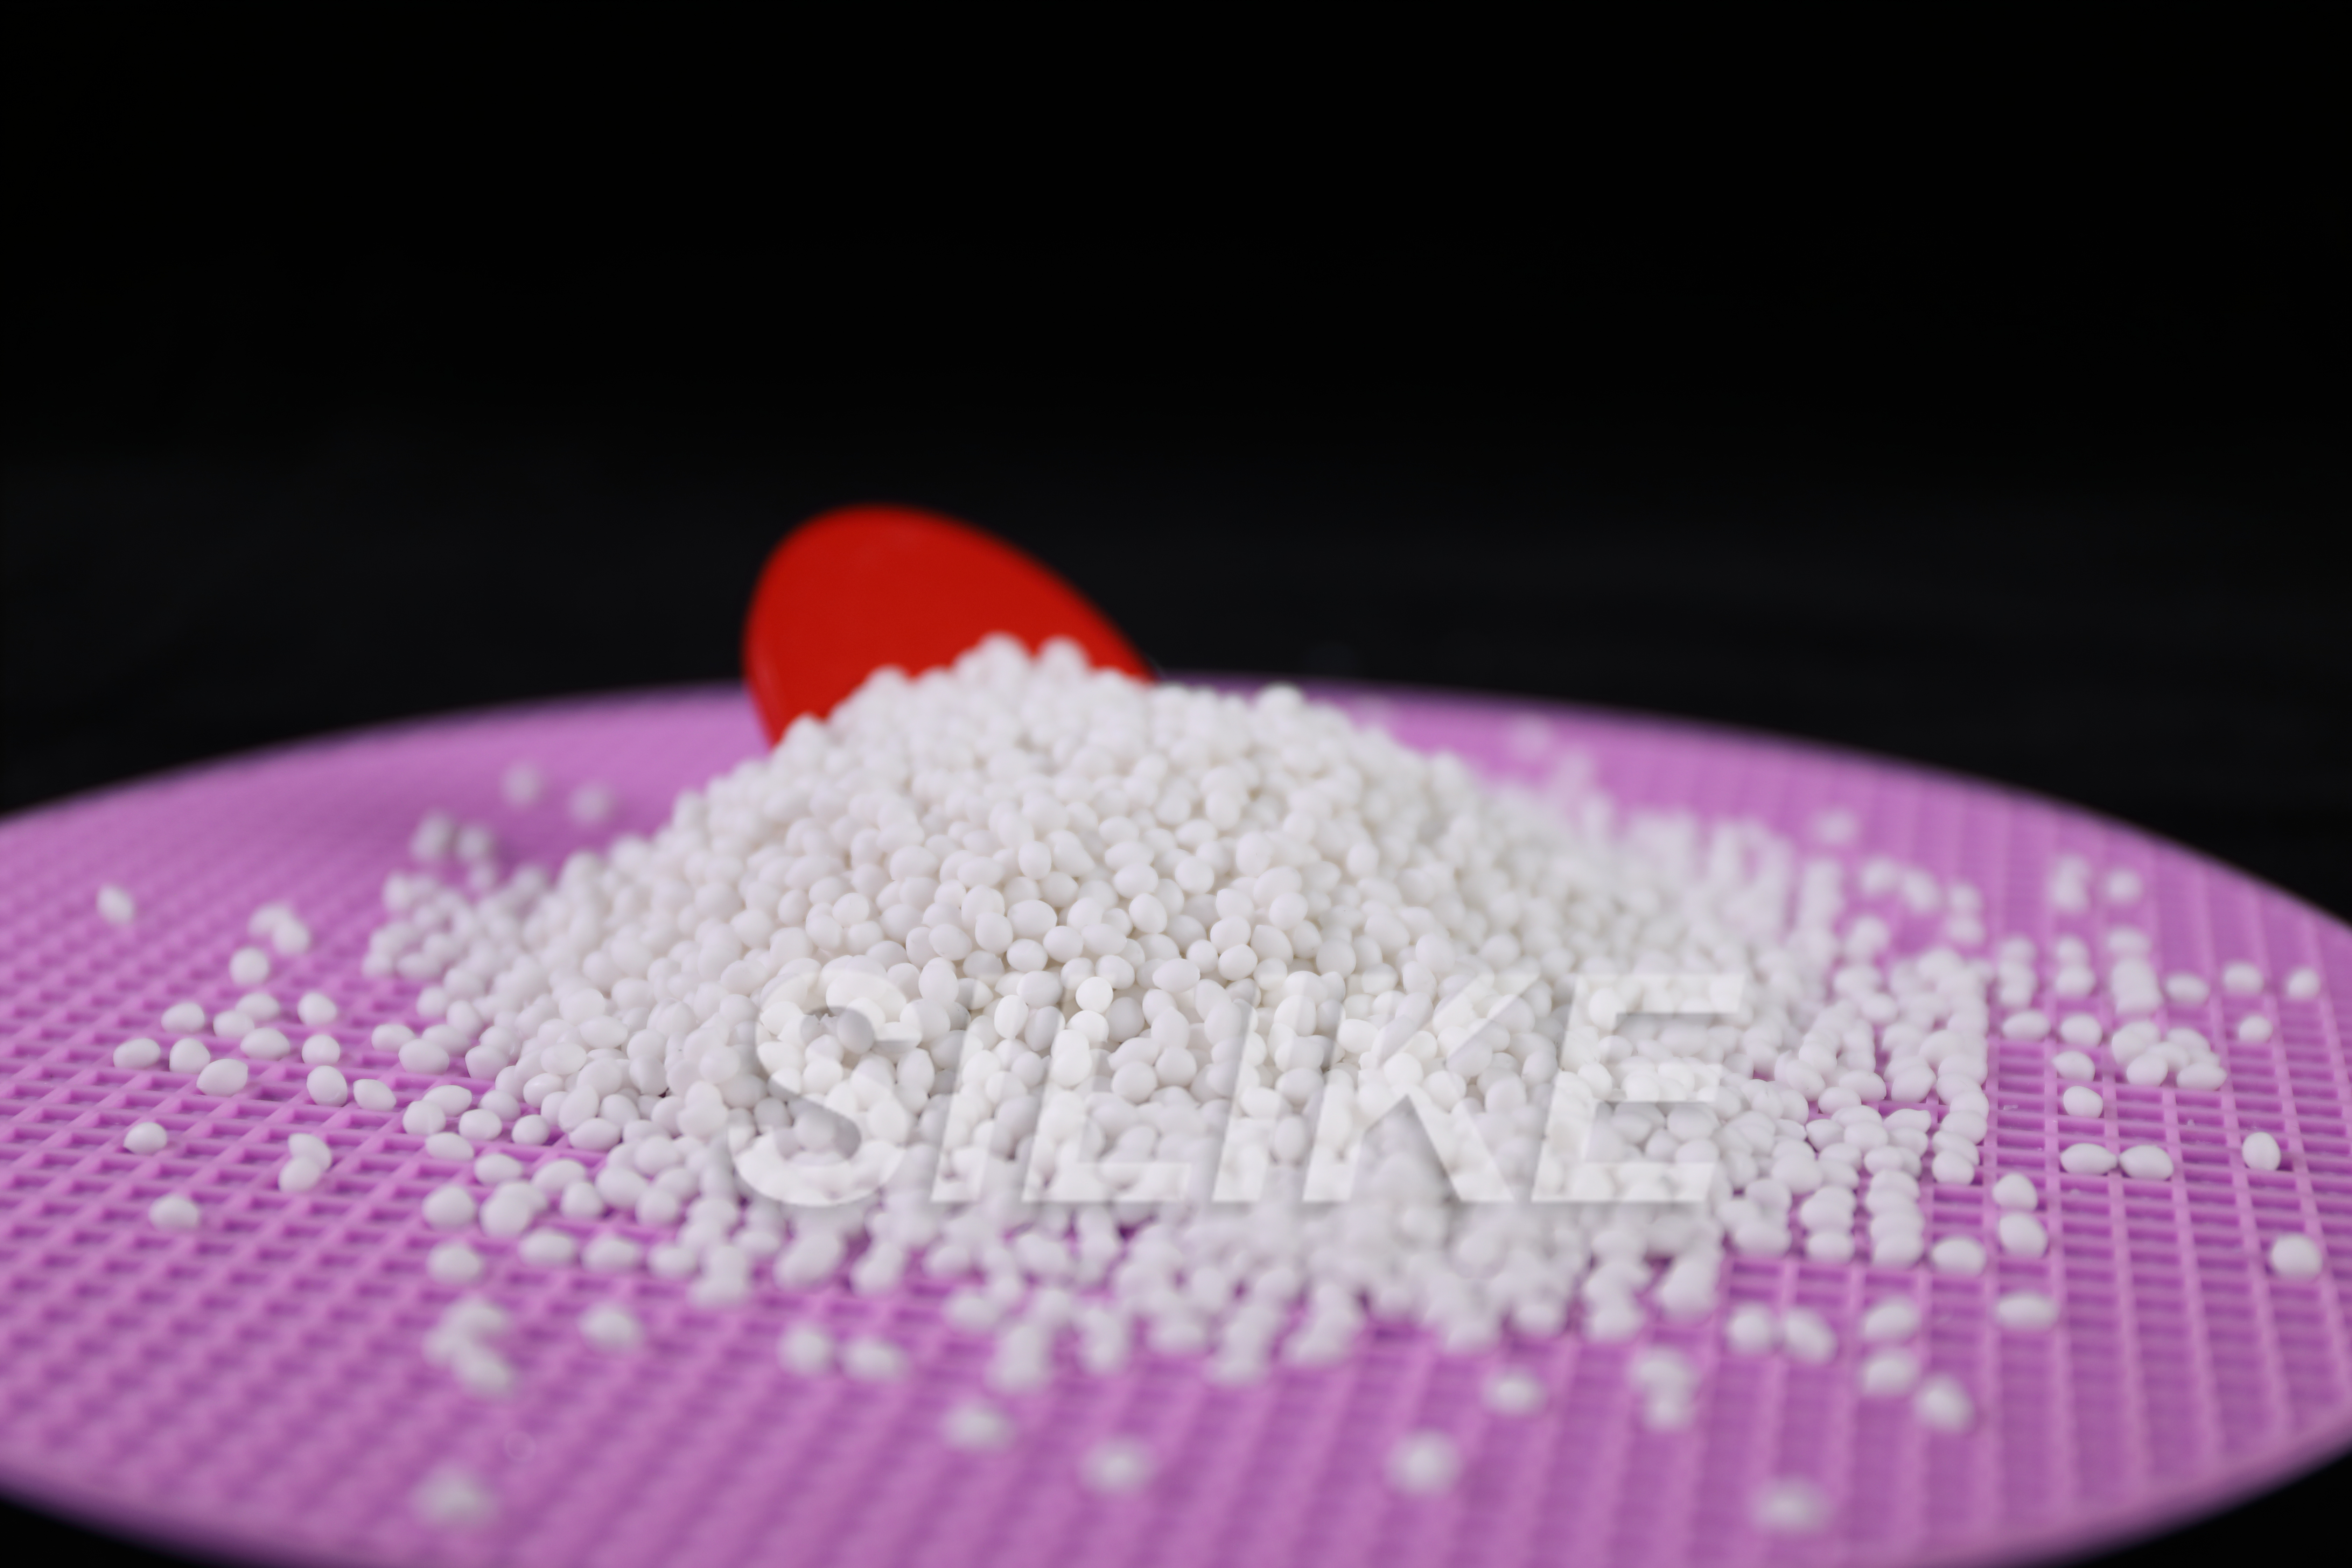 Si-TPV 3520-70A durable dynamic vulcanizated thermoplastic silicone-based elastomers – Silike